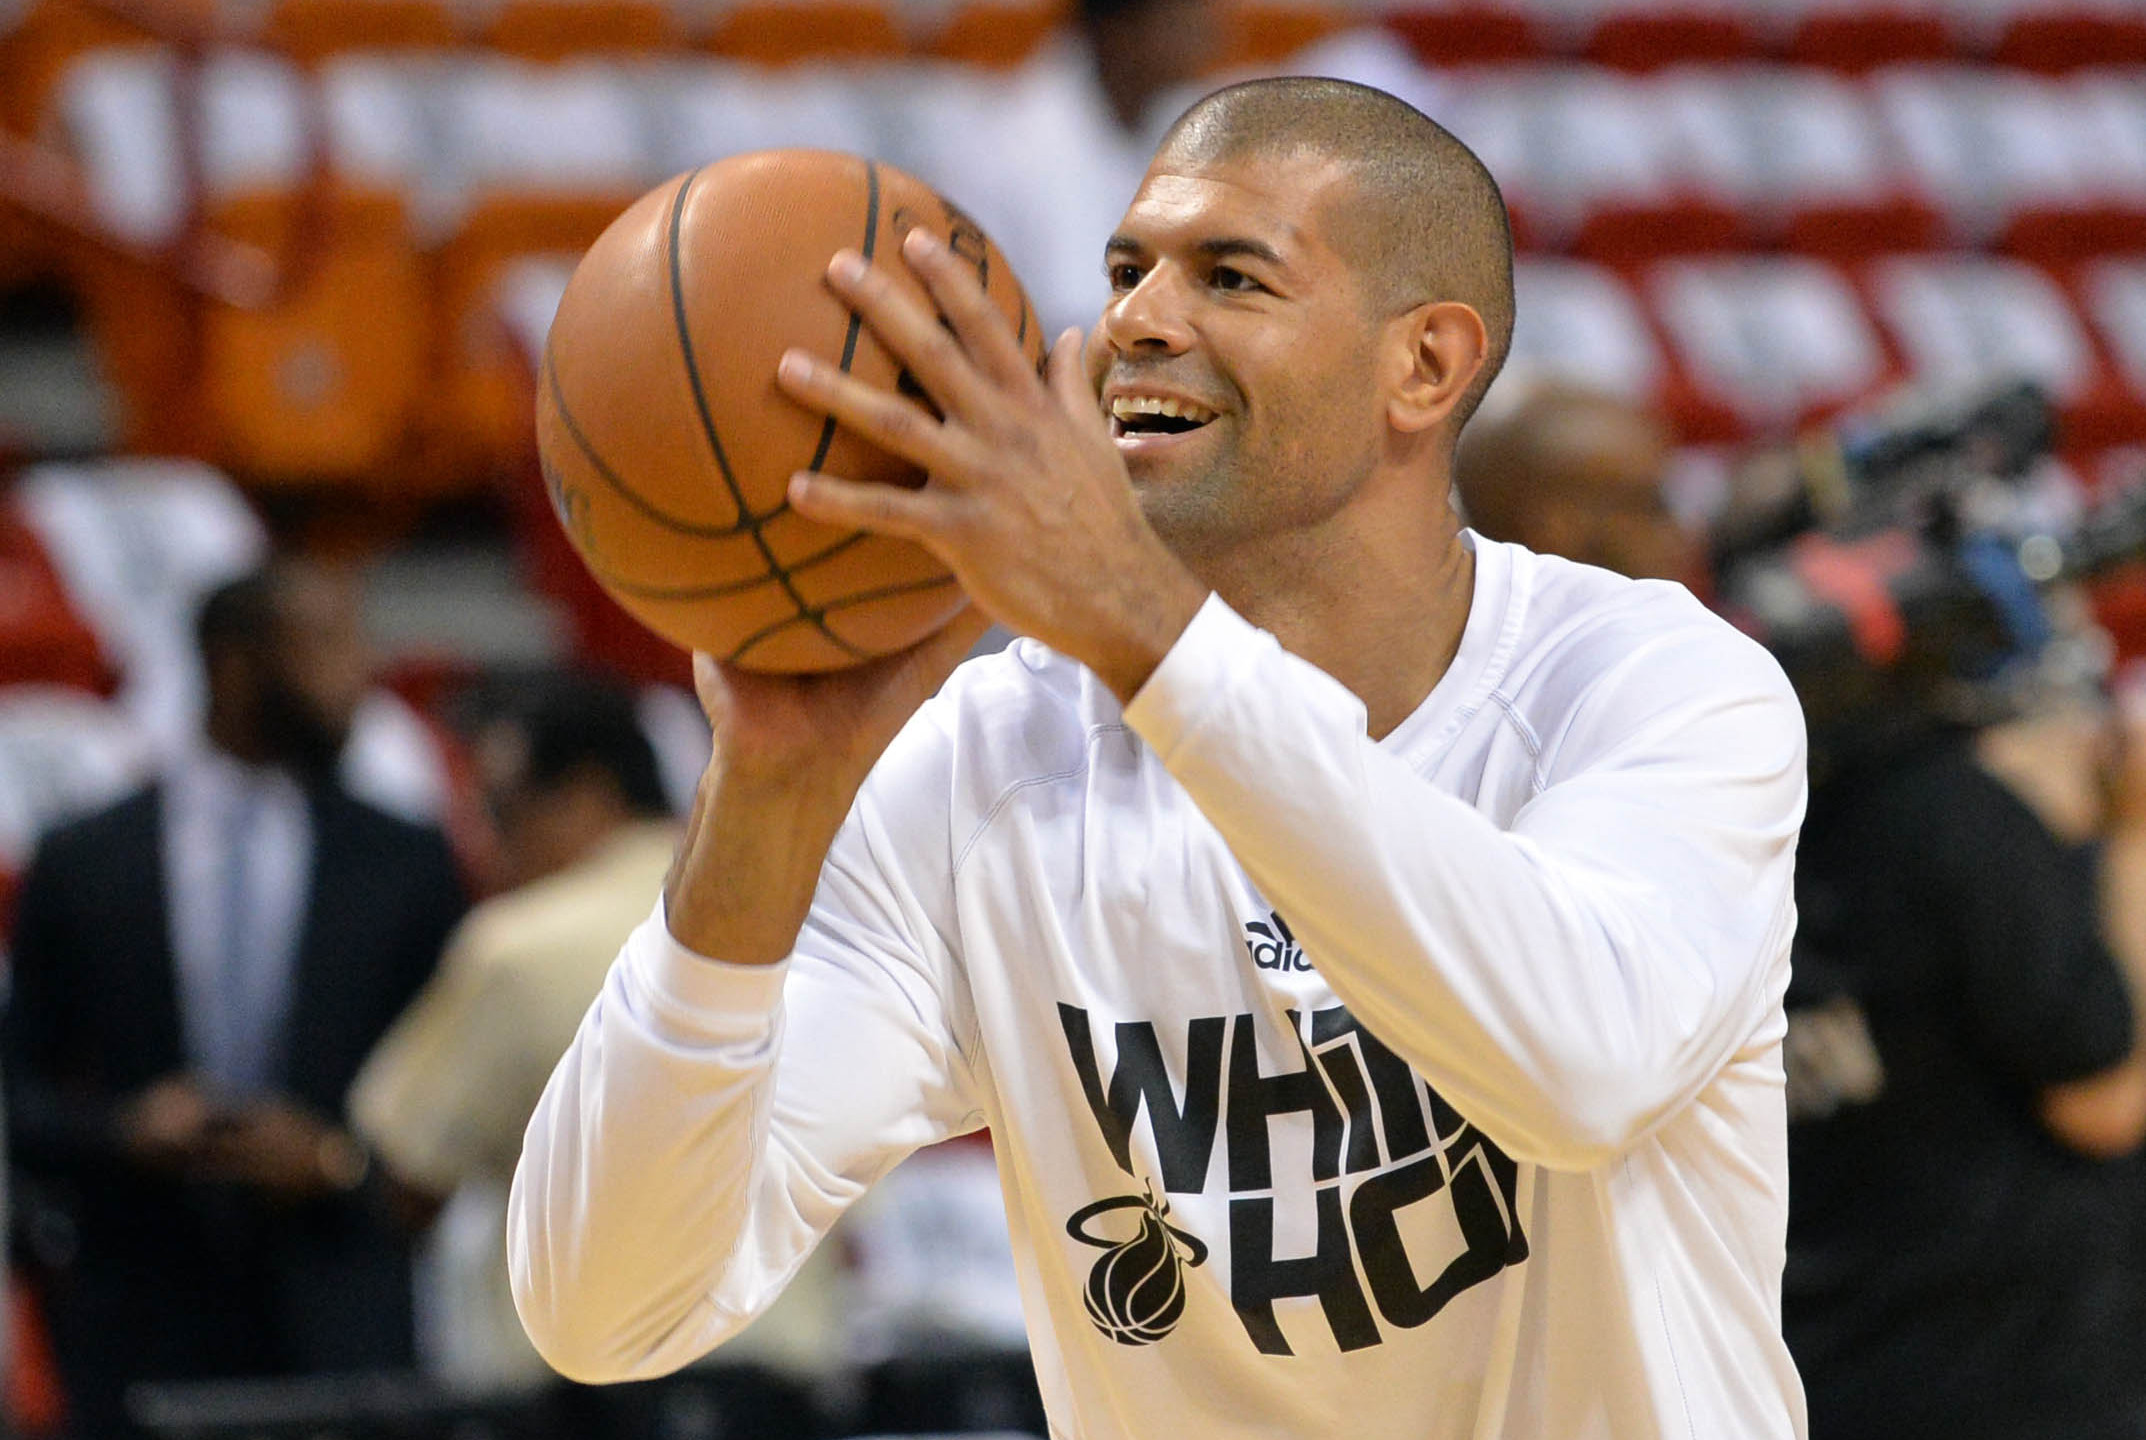 Report: Shane Battier Will Retire, Join ESPN As Analyst After